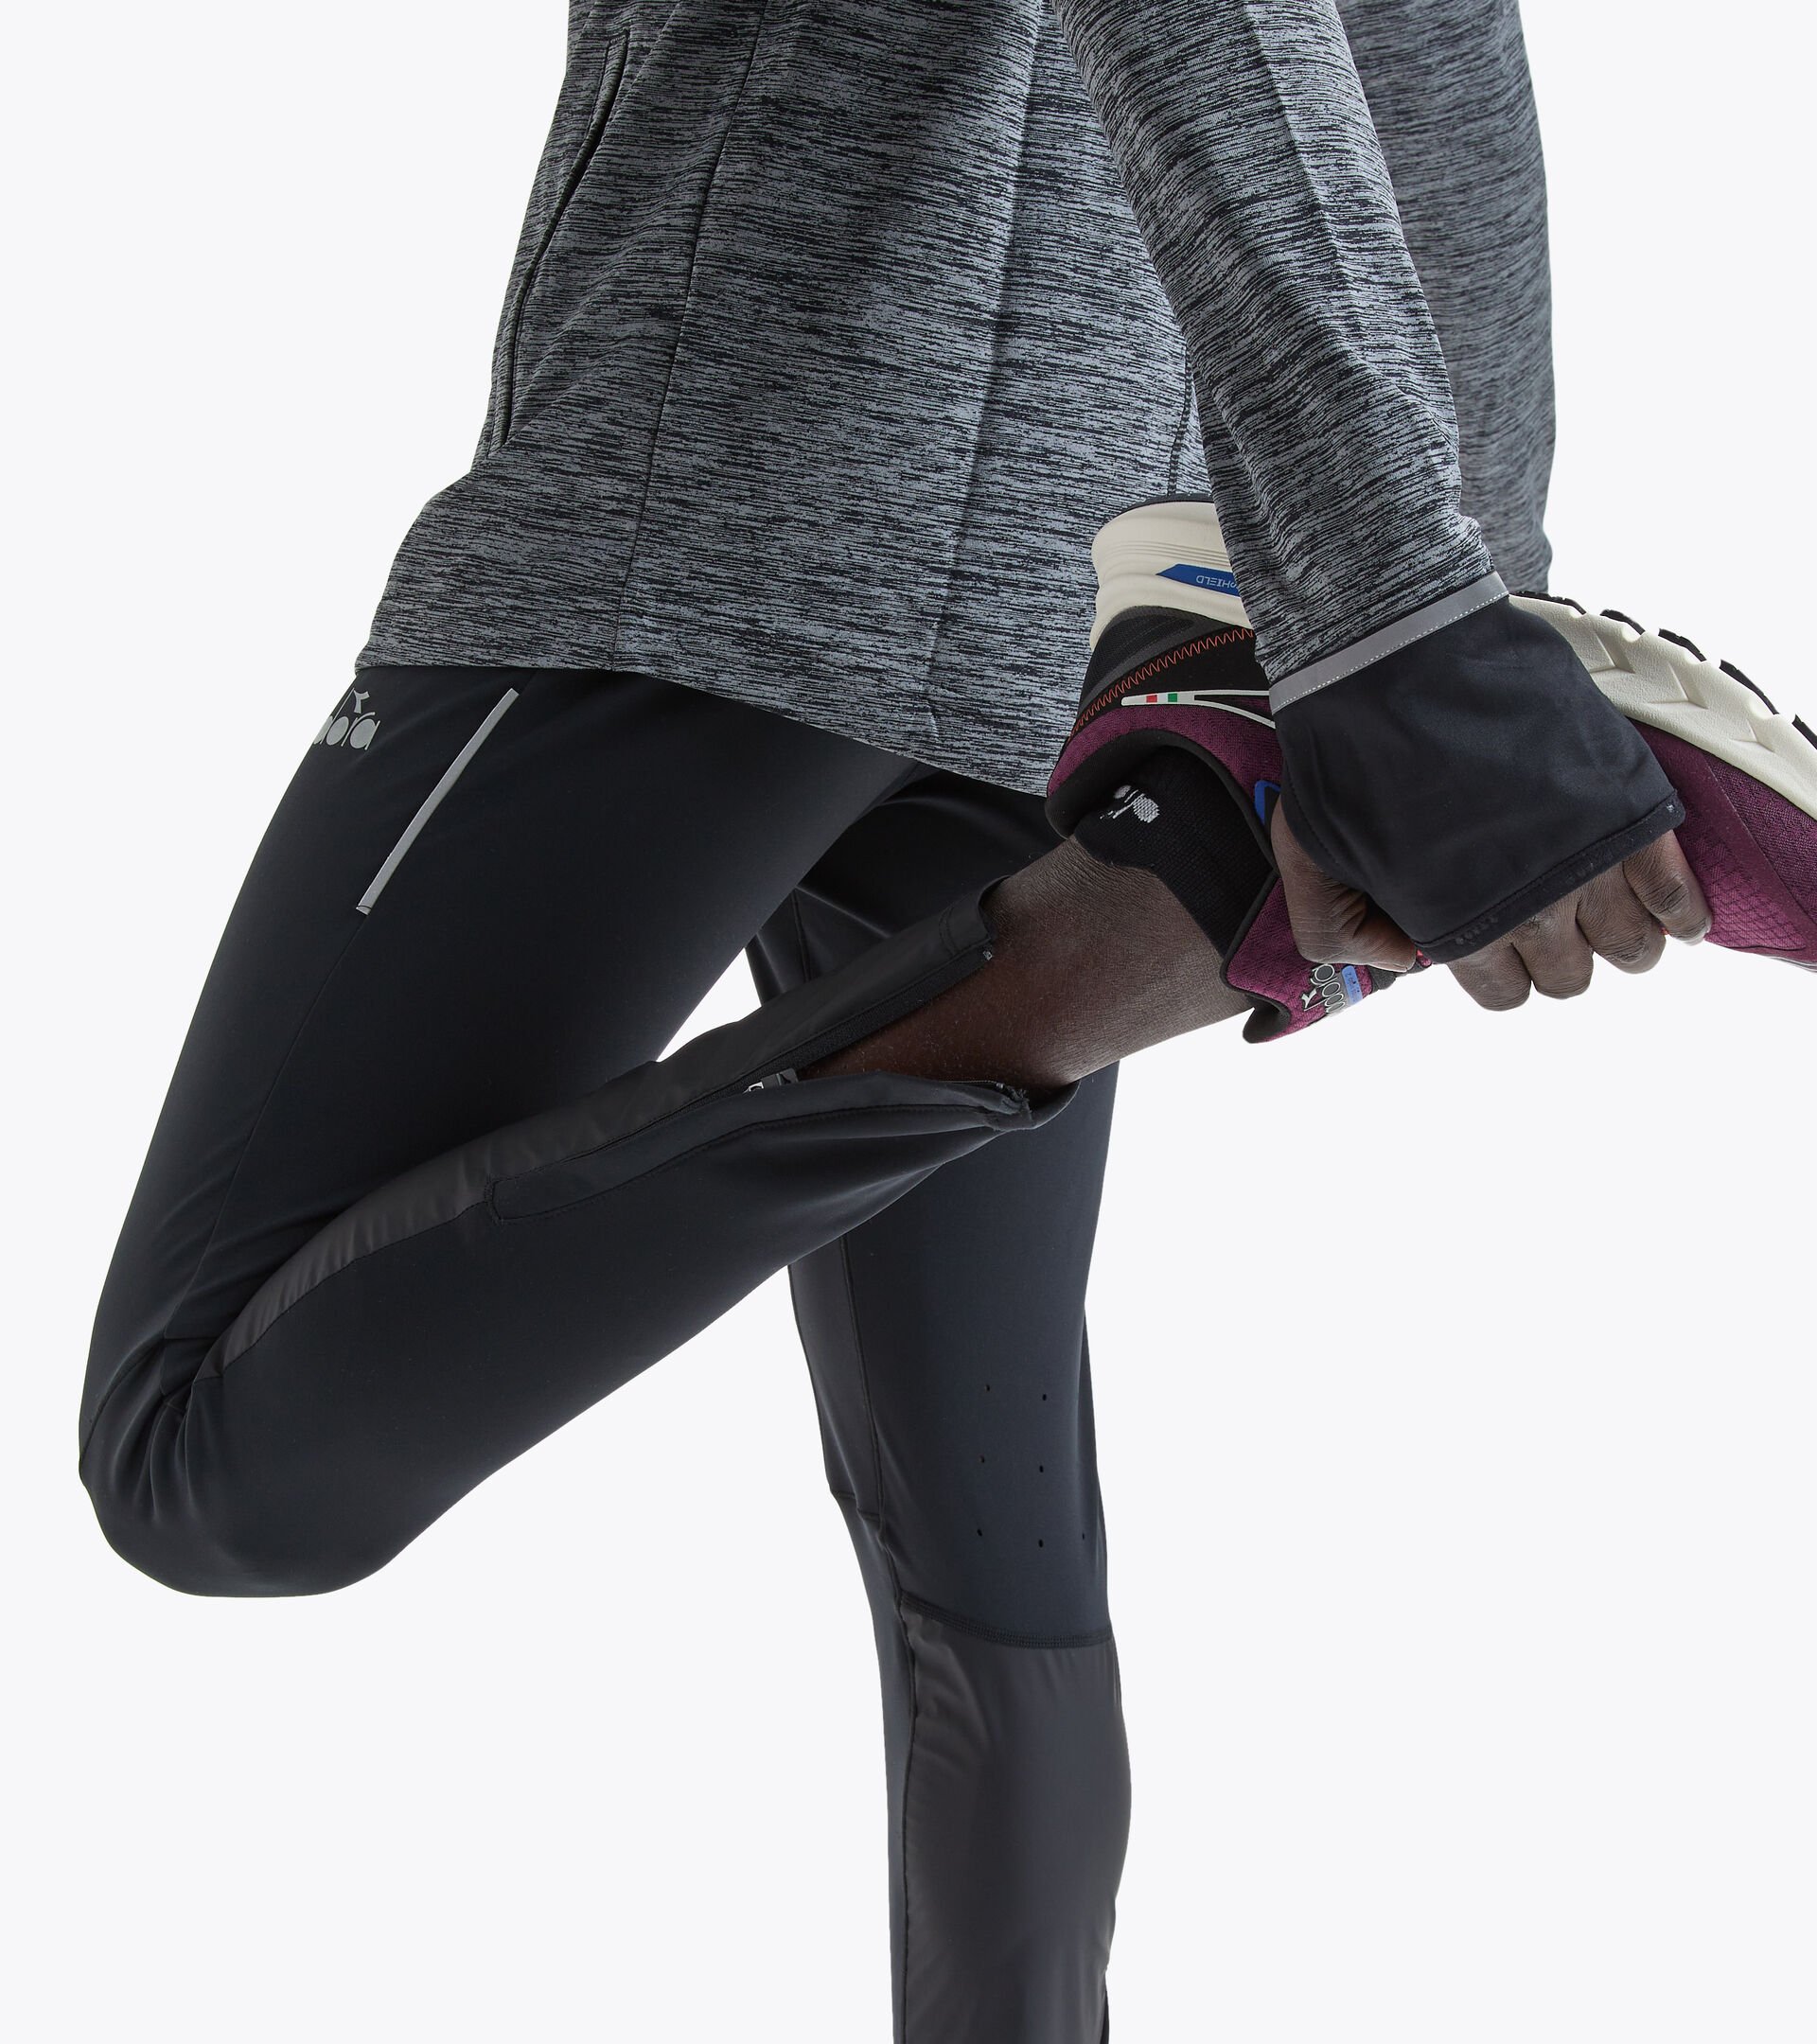 WINTER RUNNING TIGHTS - Leggings - black out